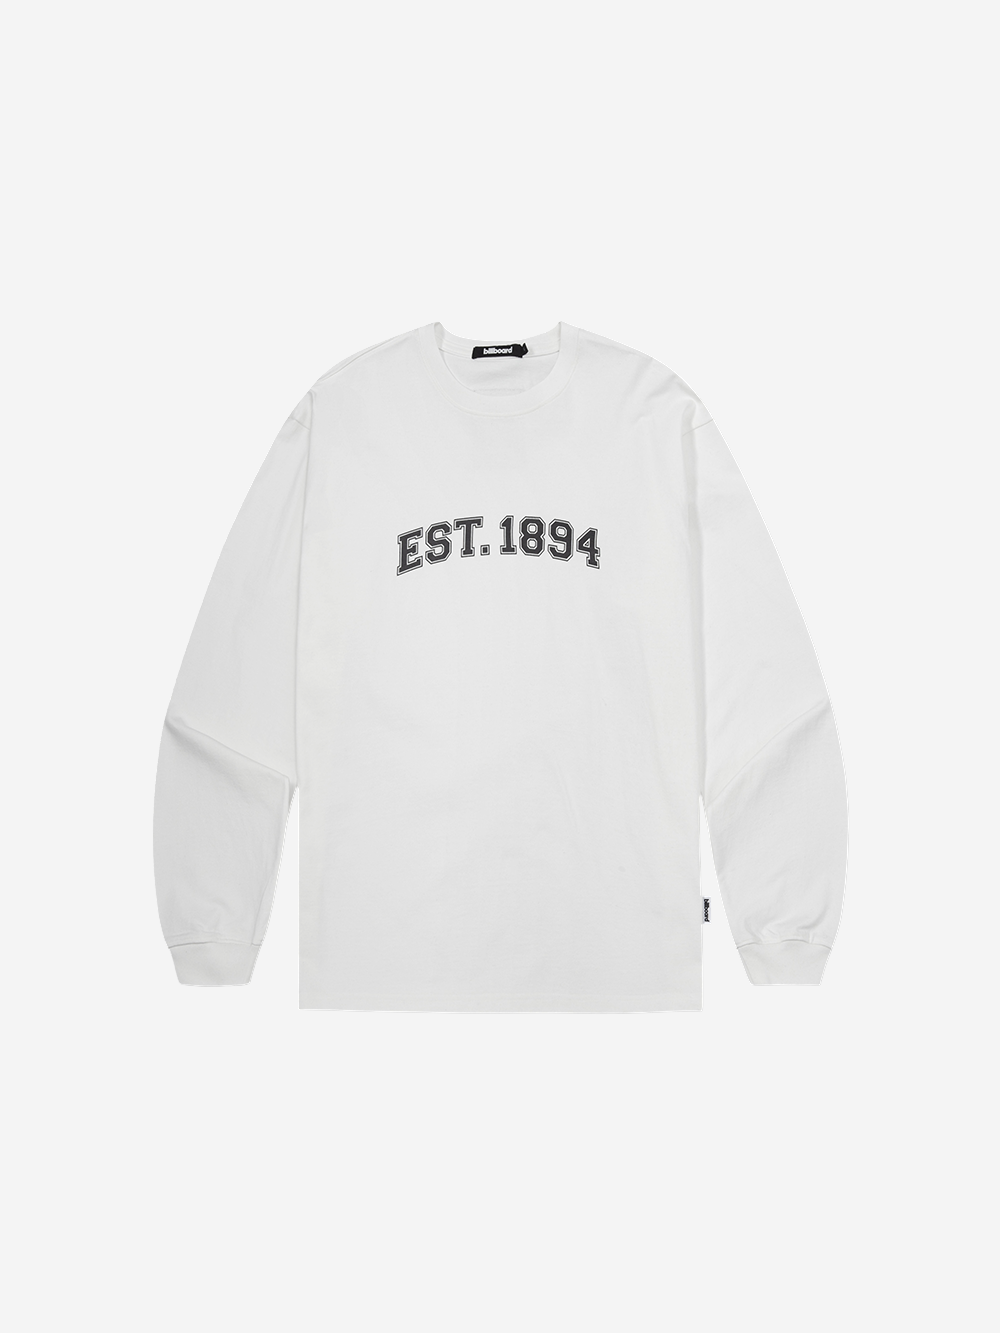 EST1894 Loose Fit Long Sleeve_White